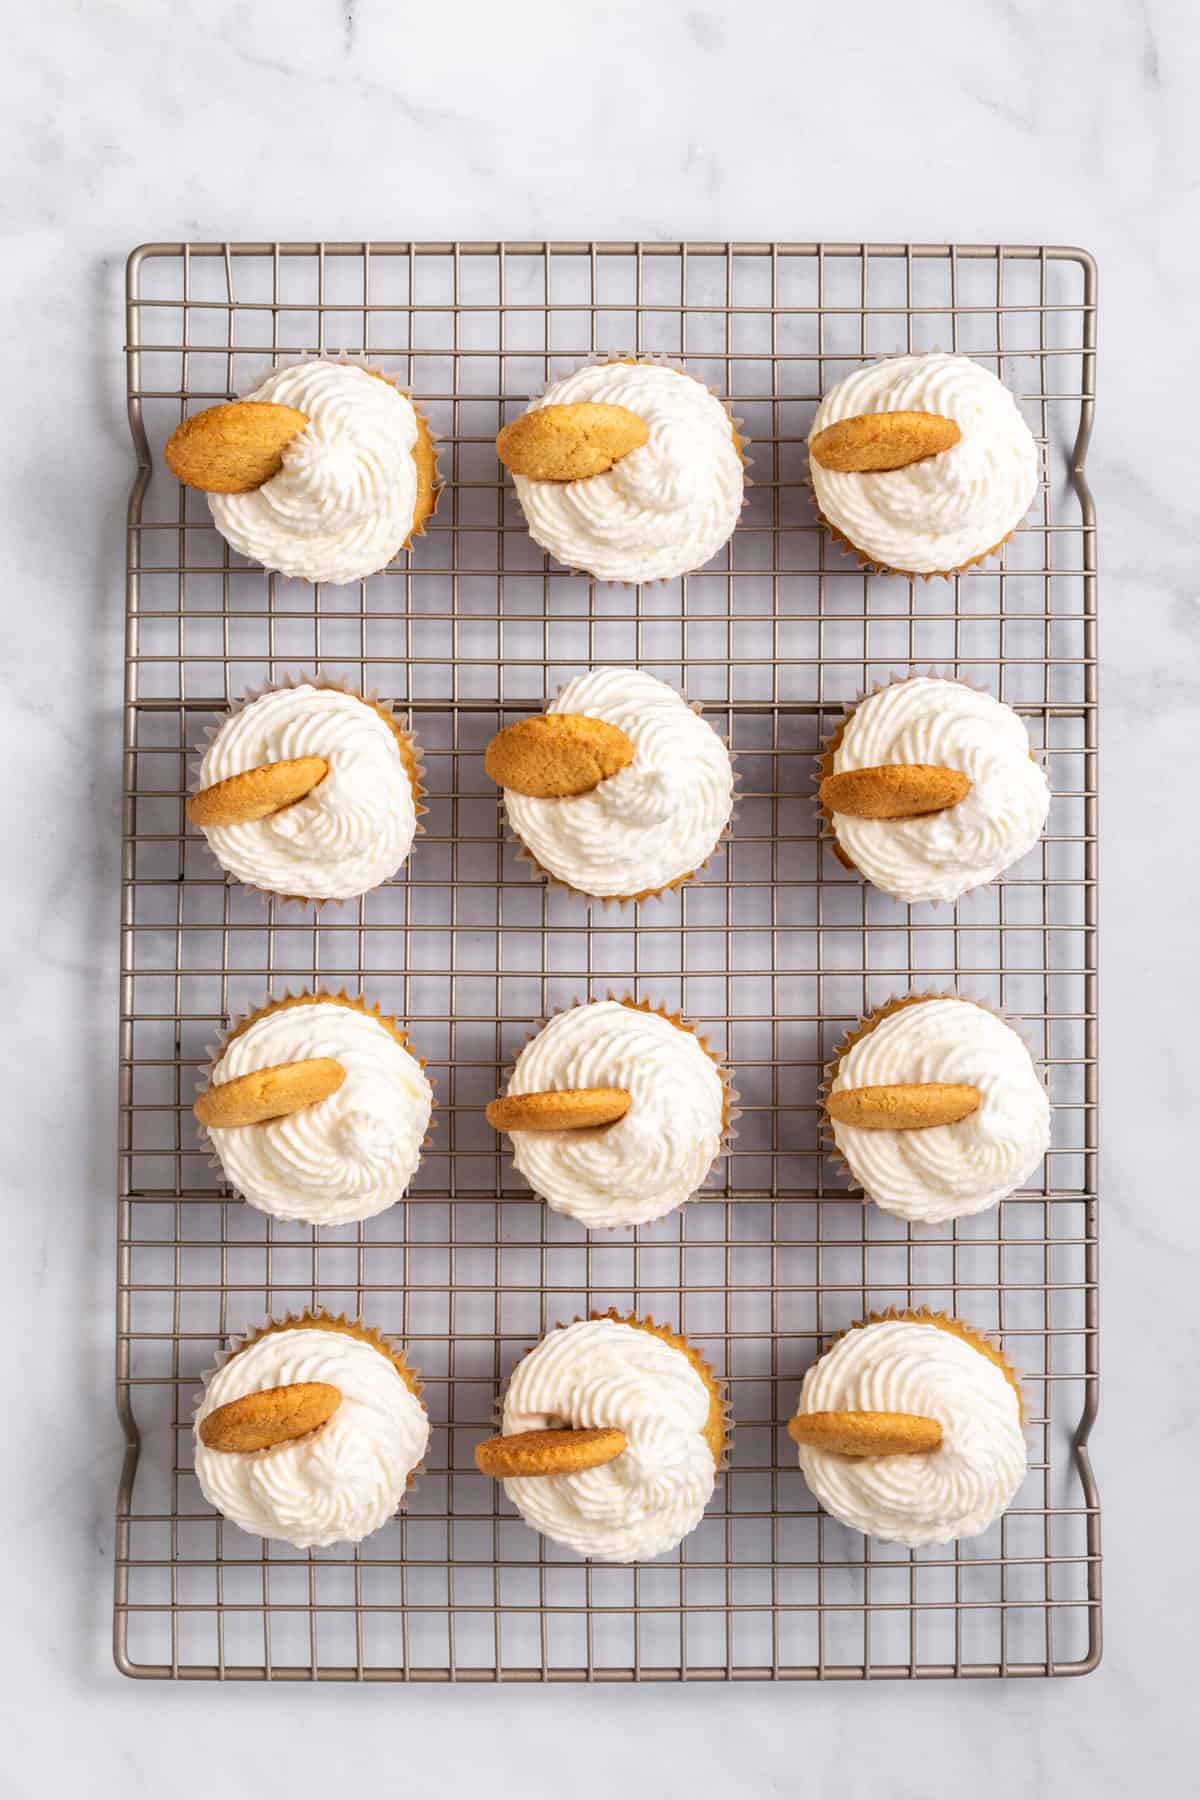 12 prepared banana pudding cupcakes sitting on a cooling rack.